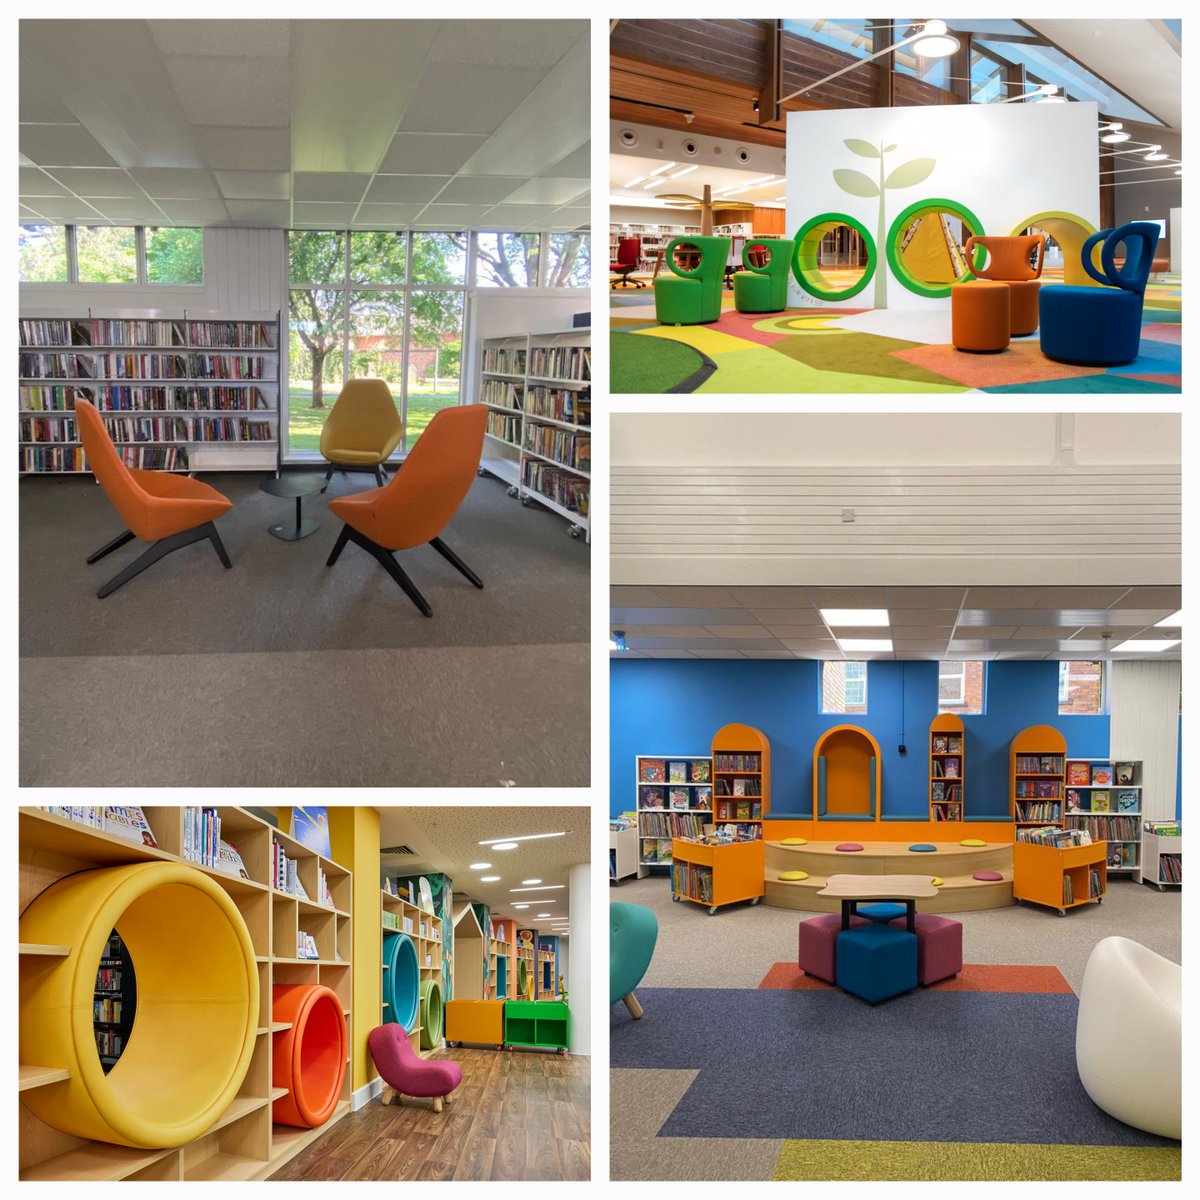 FIND INSPIRATION IN OUR WORLD OF INTERIOR DESIGN! Cosy nooks, sensory rooms, exciting children's libraries, flexible spaces for programming and events, biophilicdesign..... We are library people - call us! #librarydesign #libraries #designinglibraries thedesignconcept.co.uk/inspiration/